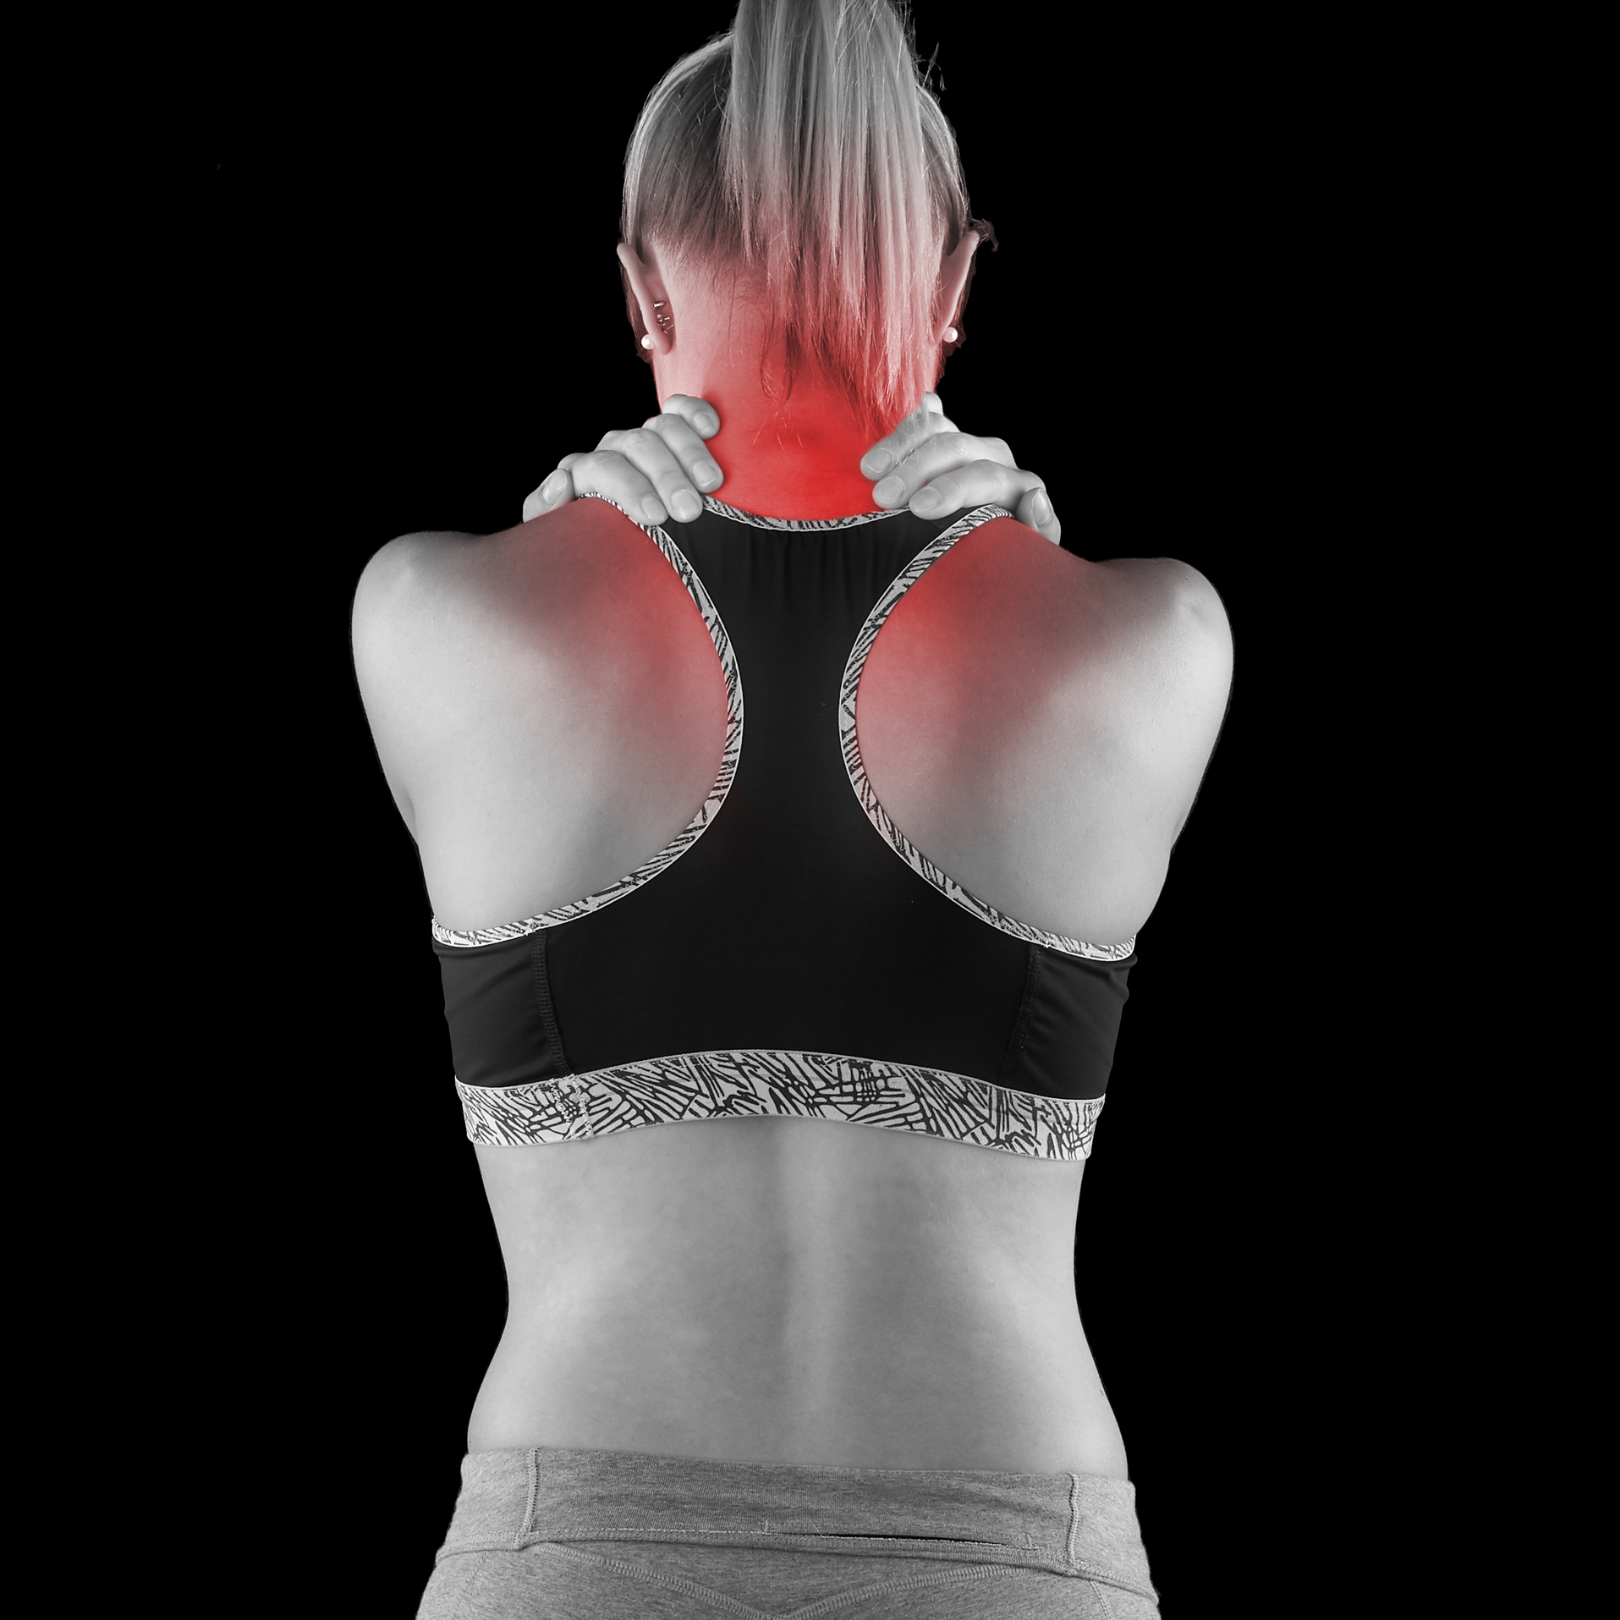 My sports bra: Causing my neck tightness and pain? – Get Well